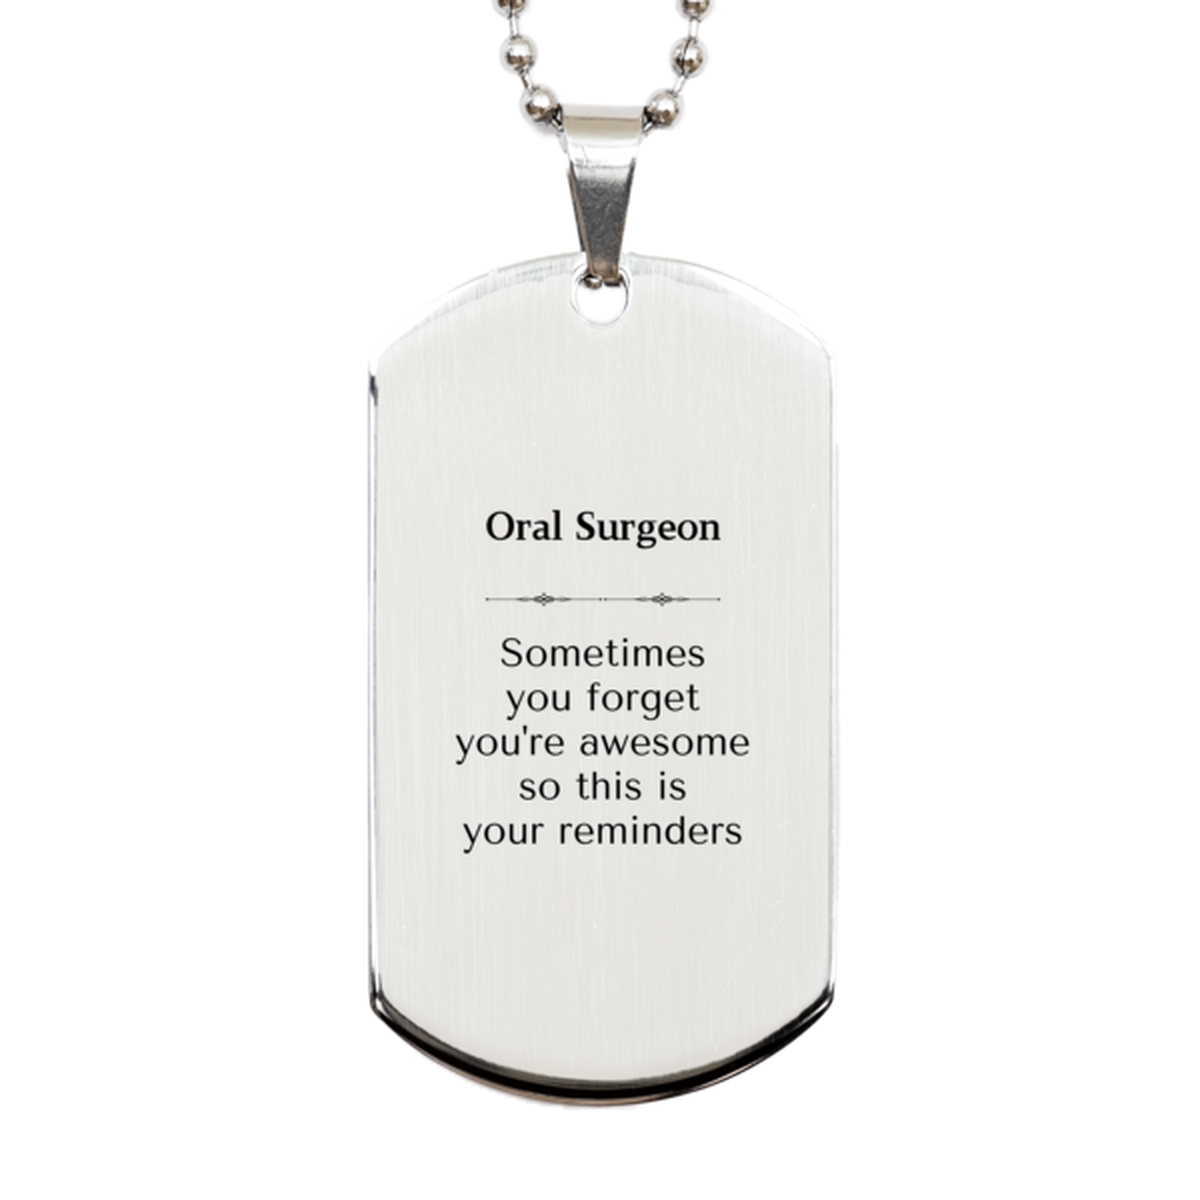 Sentimental Oral Surgeon Silver Dog Tag, Oral Surgeon Sometimes you forget you're awesome so this is your reminders, Graduation Christmas Birthday Gifts for Oral Surgeon, Men, Women, Coworkers